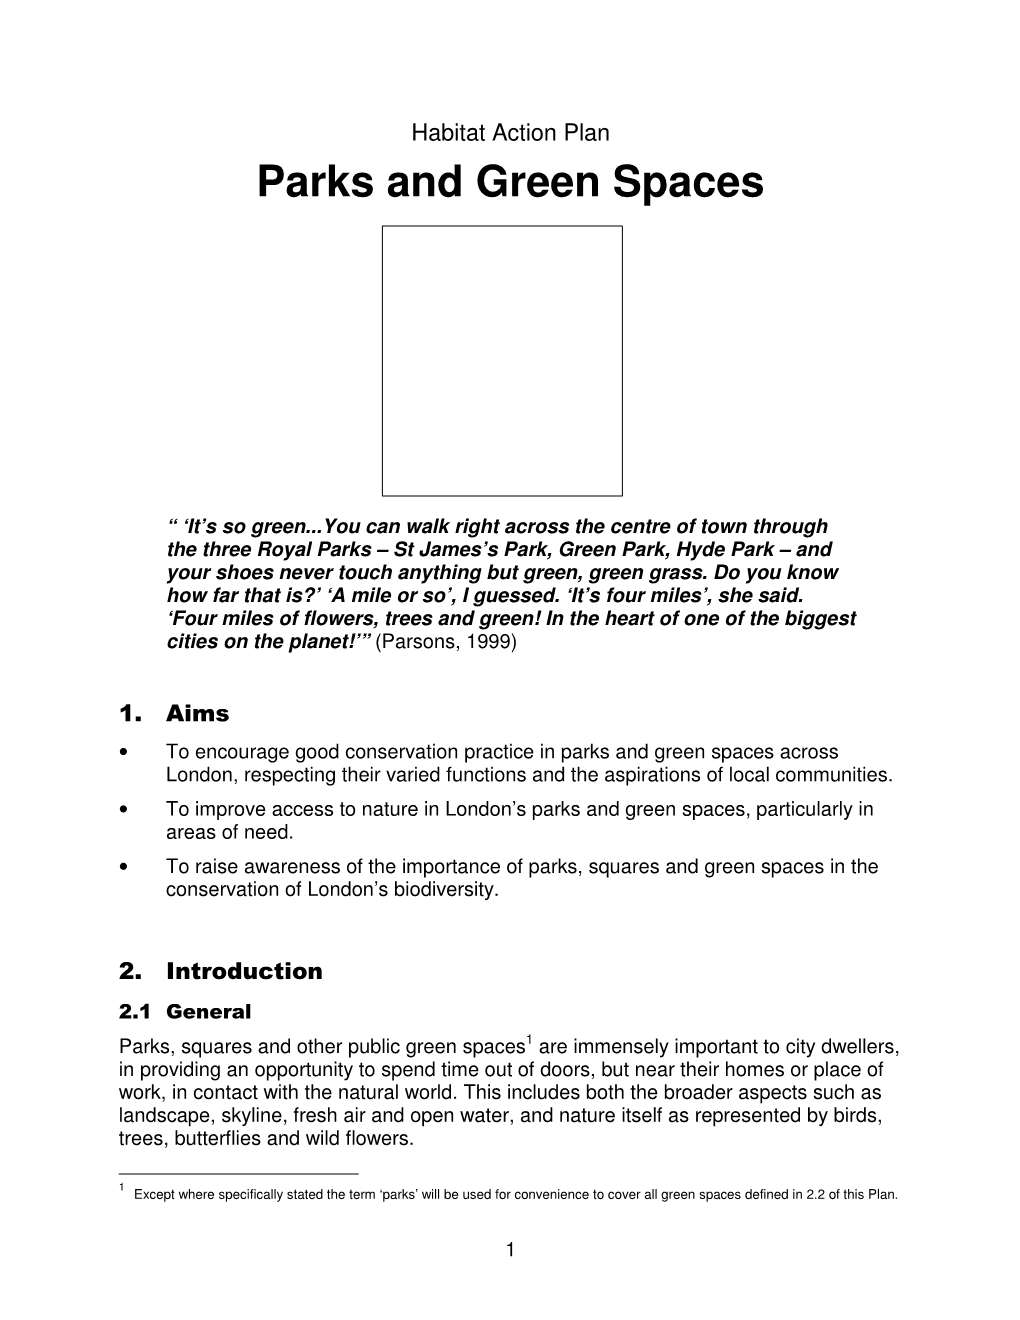 Parks and Green Spaces